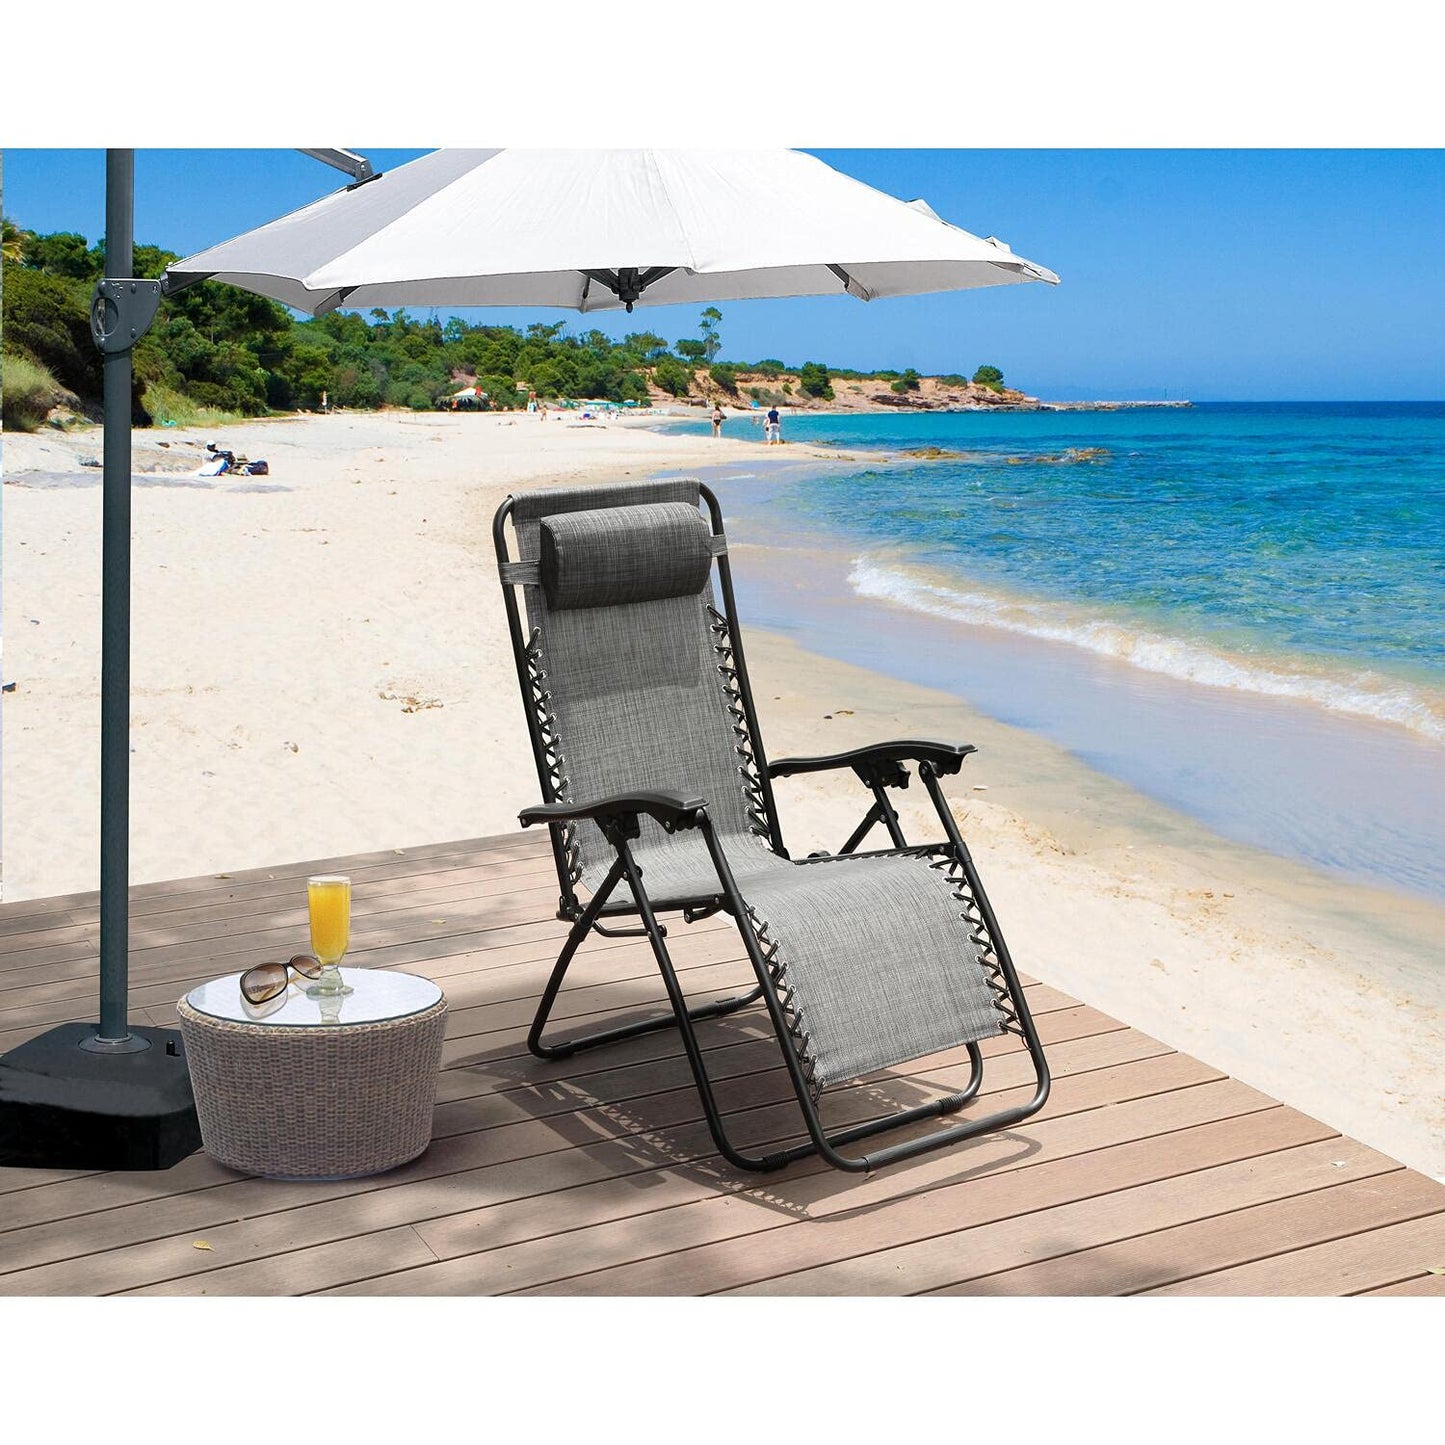 Zero Gravity Chairs Set of 2 Pool Lounge Chair Zero Gravity Recliner Lawn Patio Outdoor Porch Beach Backyard Anti Gravity Chair Folding Reclining Camping Chair with Headrest by Naomi Home - Grey Modern